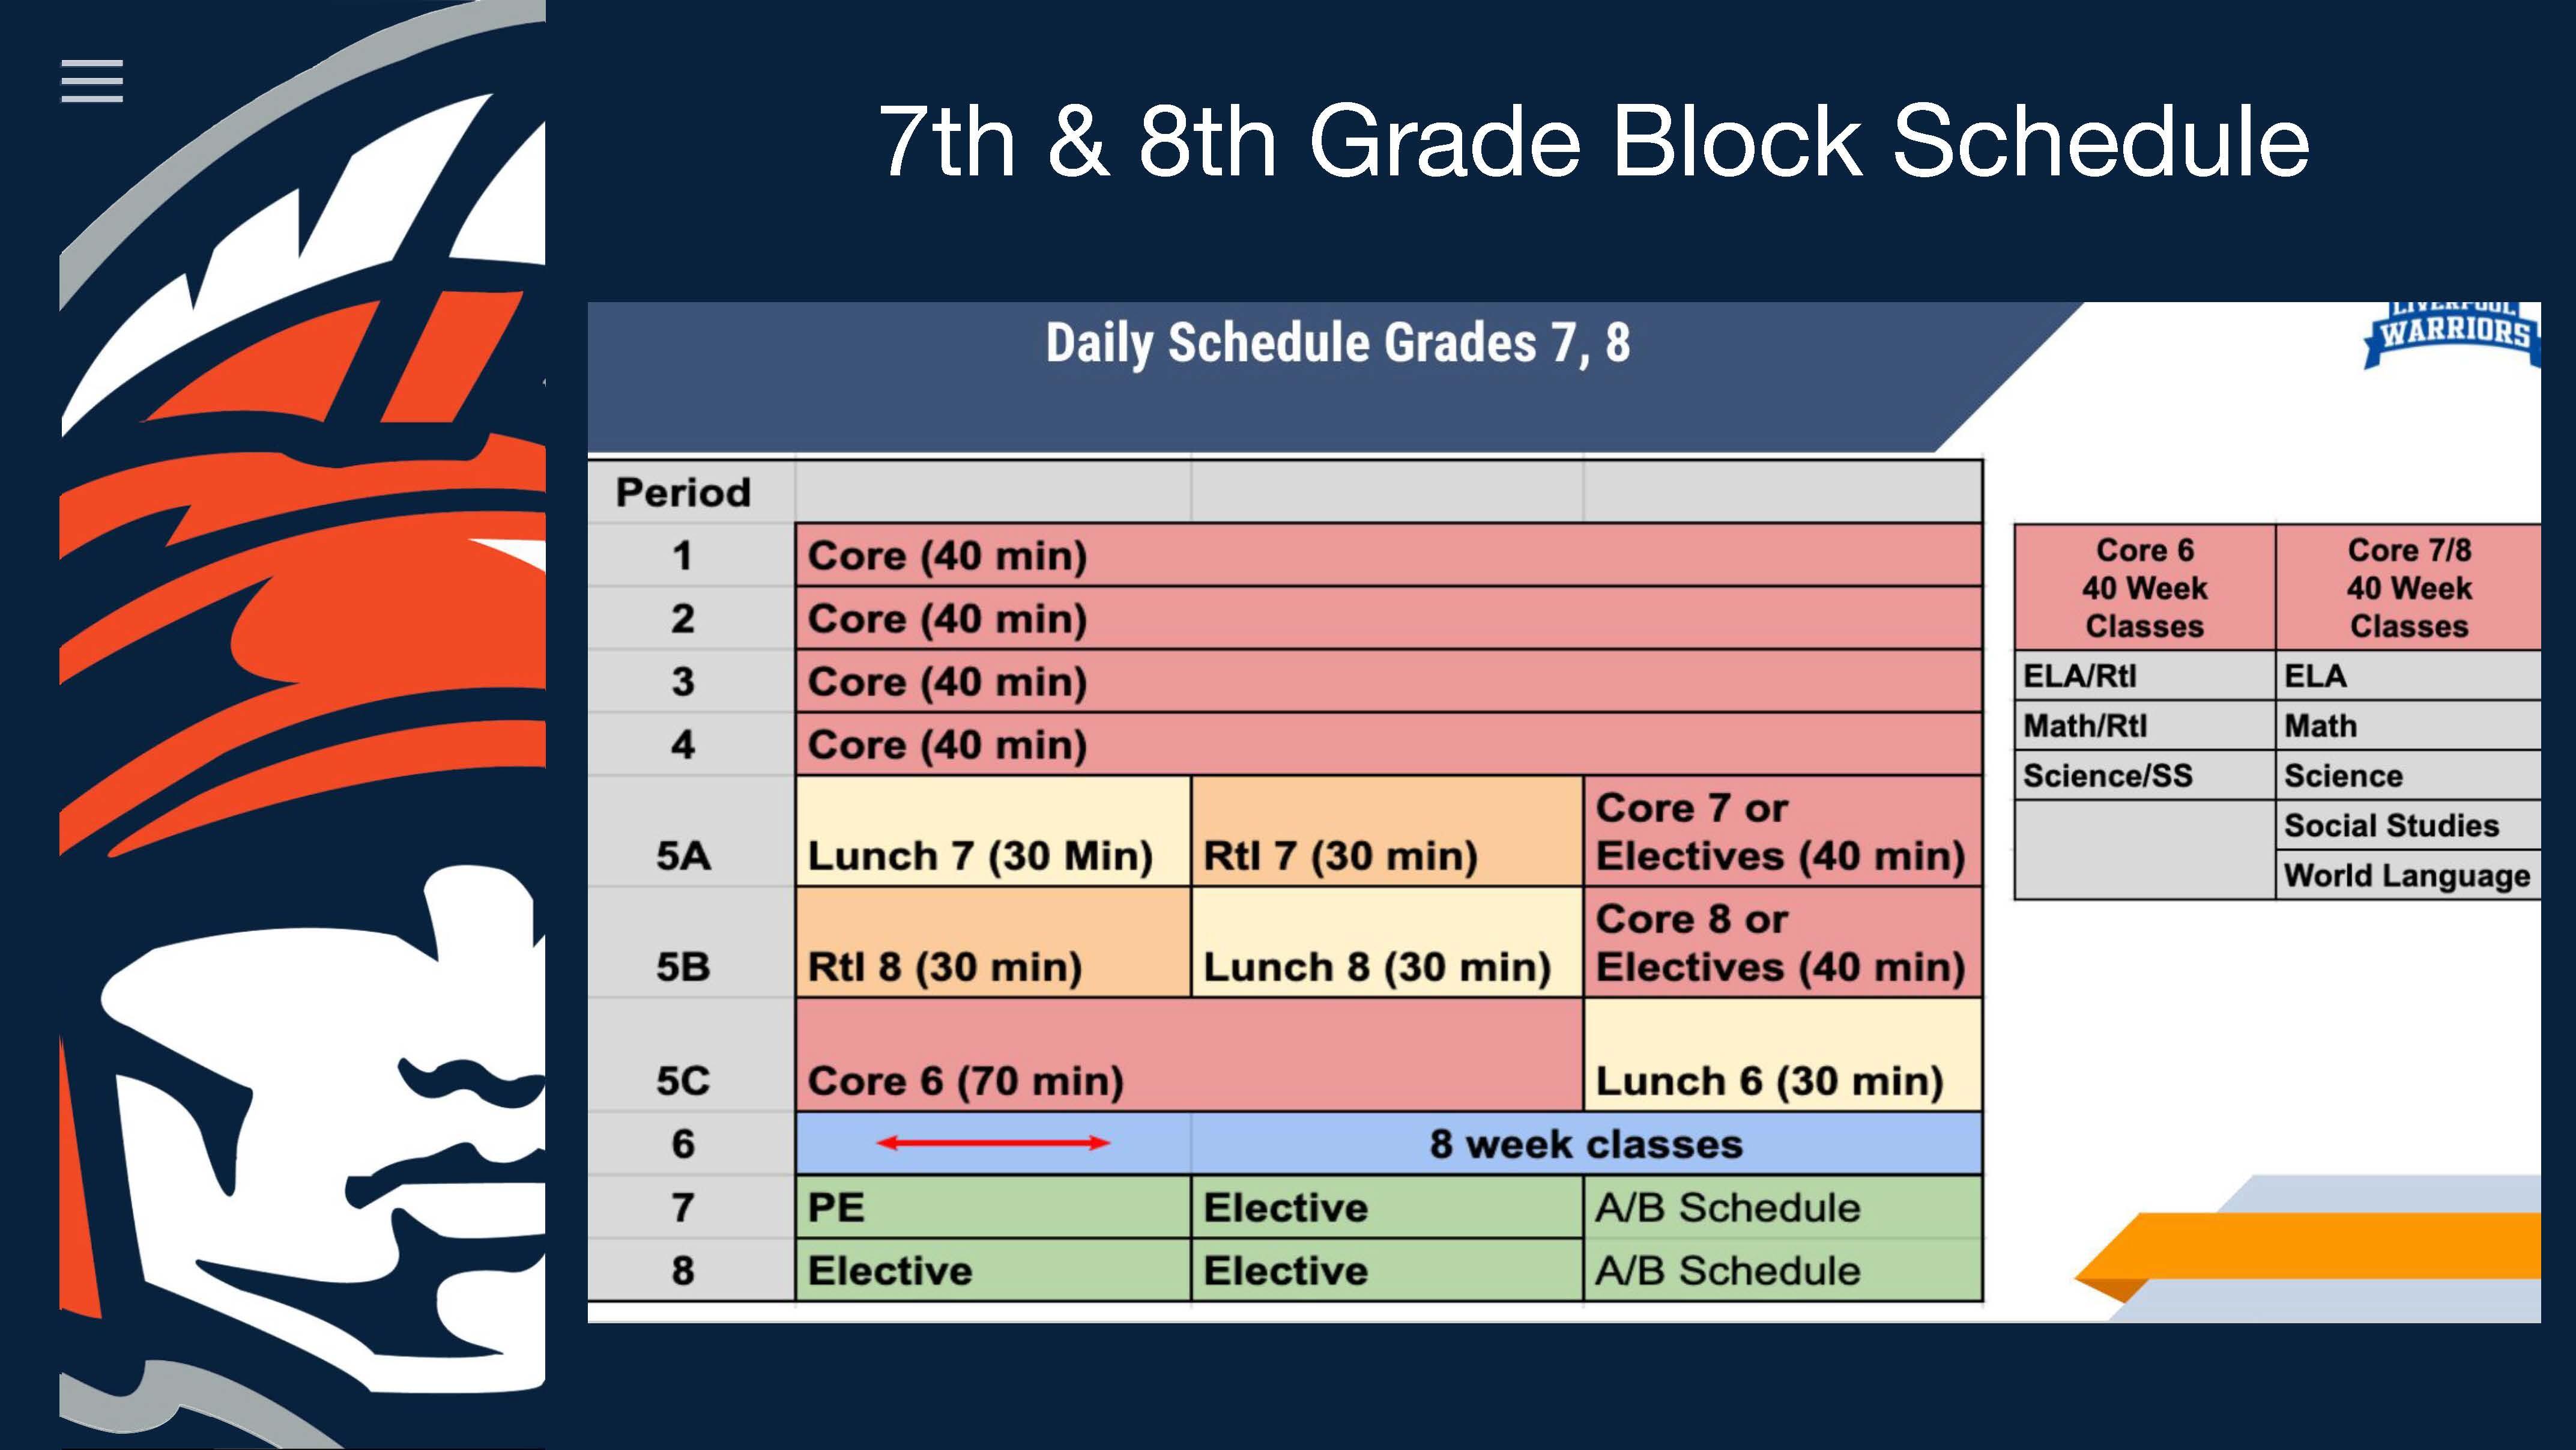 7th & 8th Grade Schedule for 2022-2023